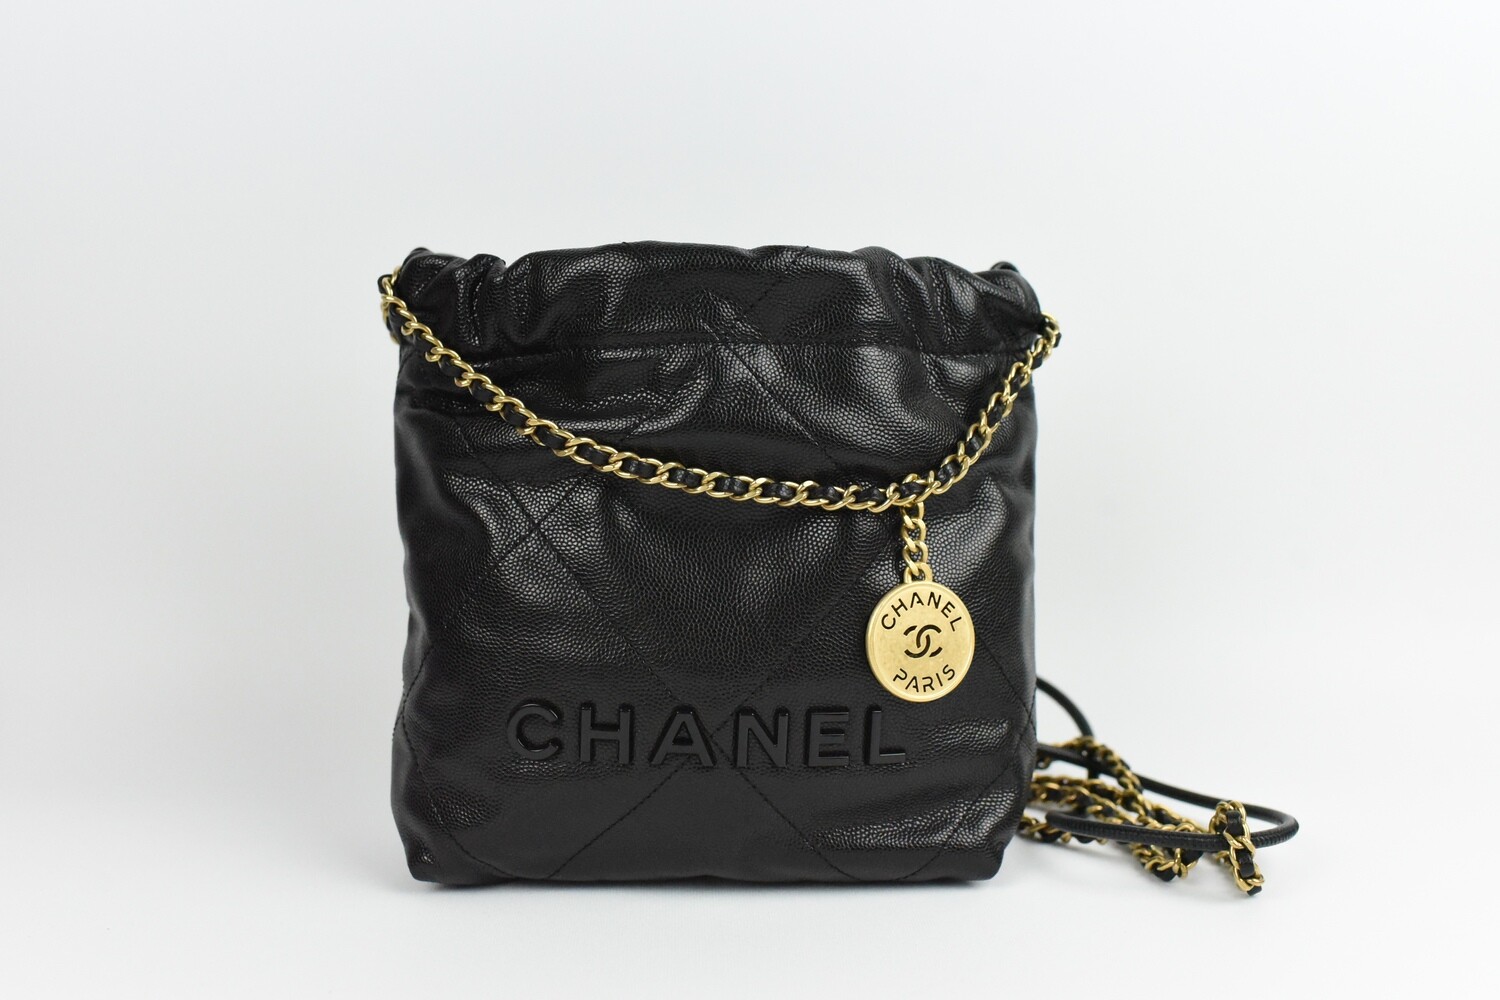 Chanel 22 Mini, Black Caviar Leather With Gold Hardware, New in